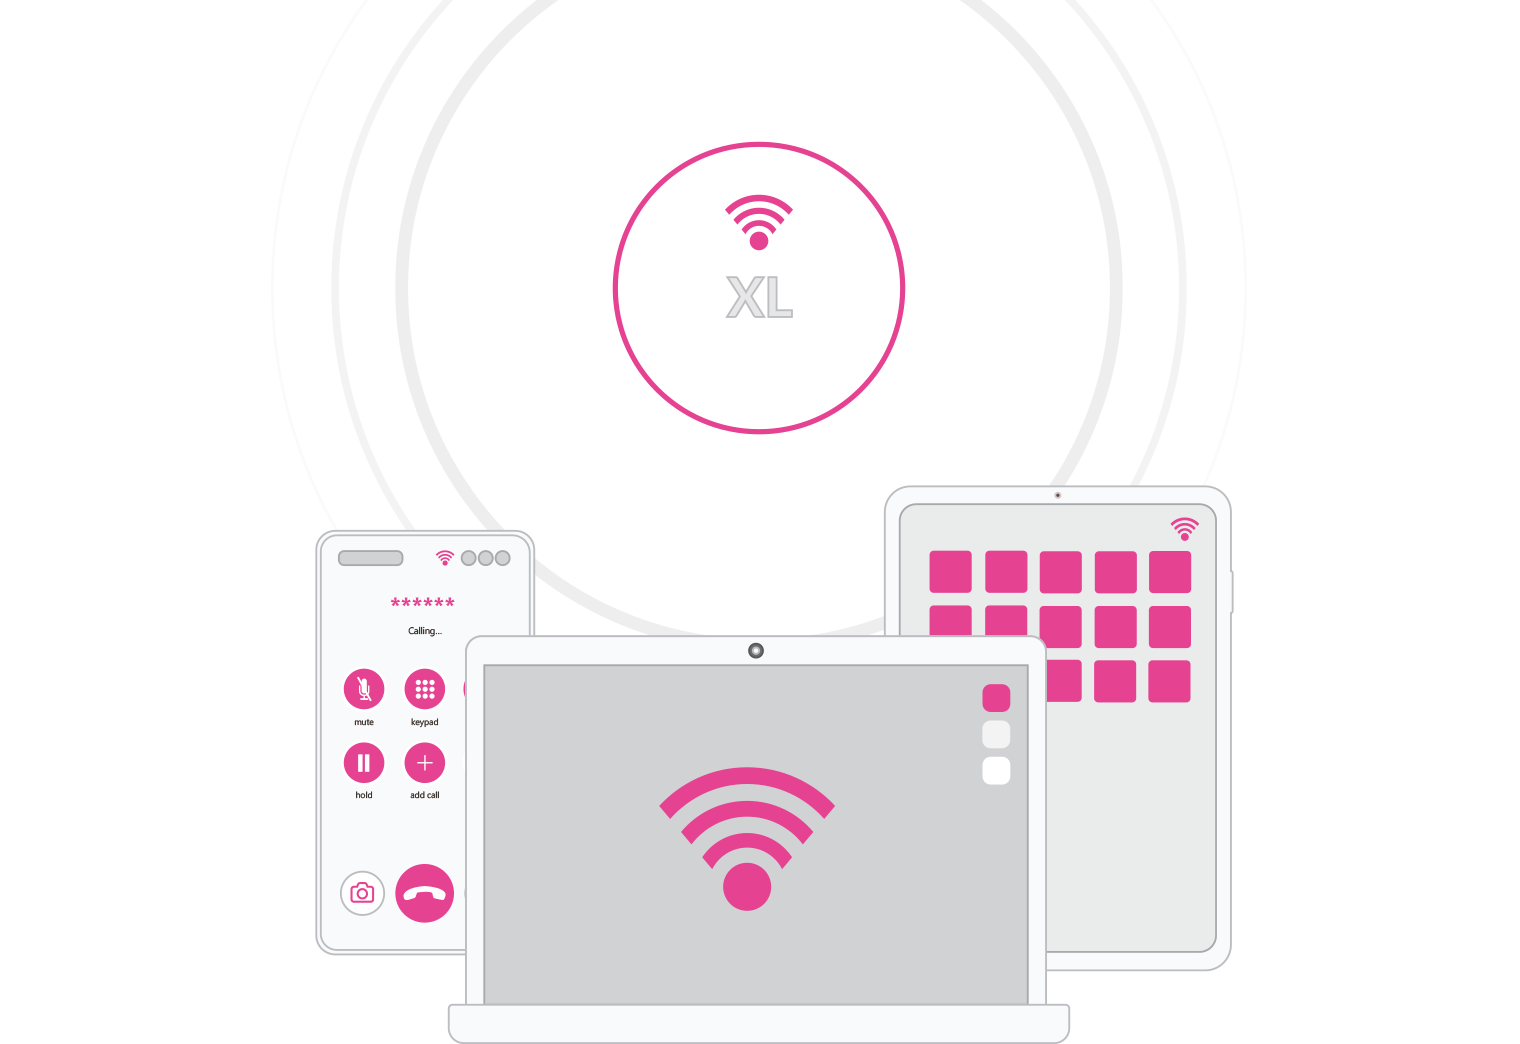 Ofcom Opens 6GHz Band for Improved WiFi Performance